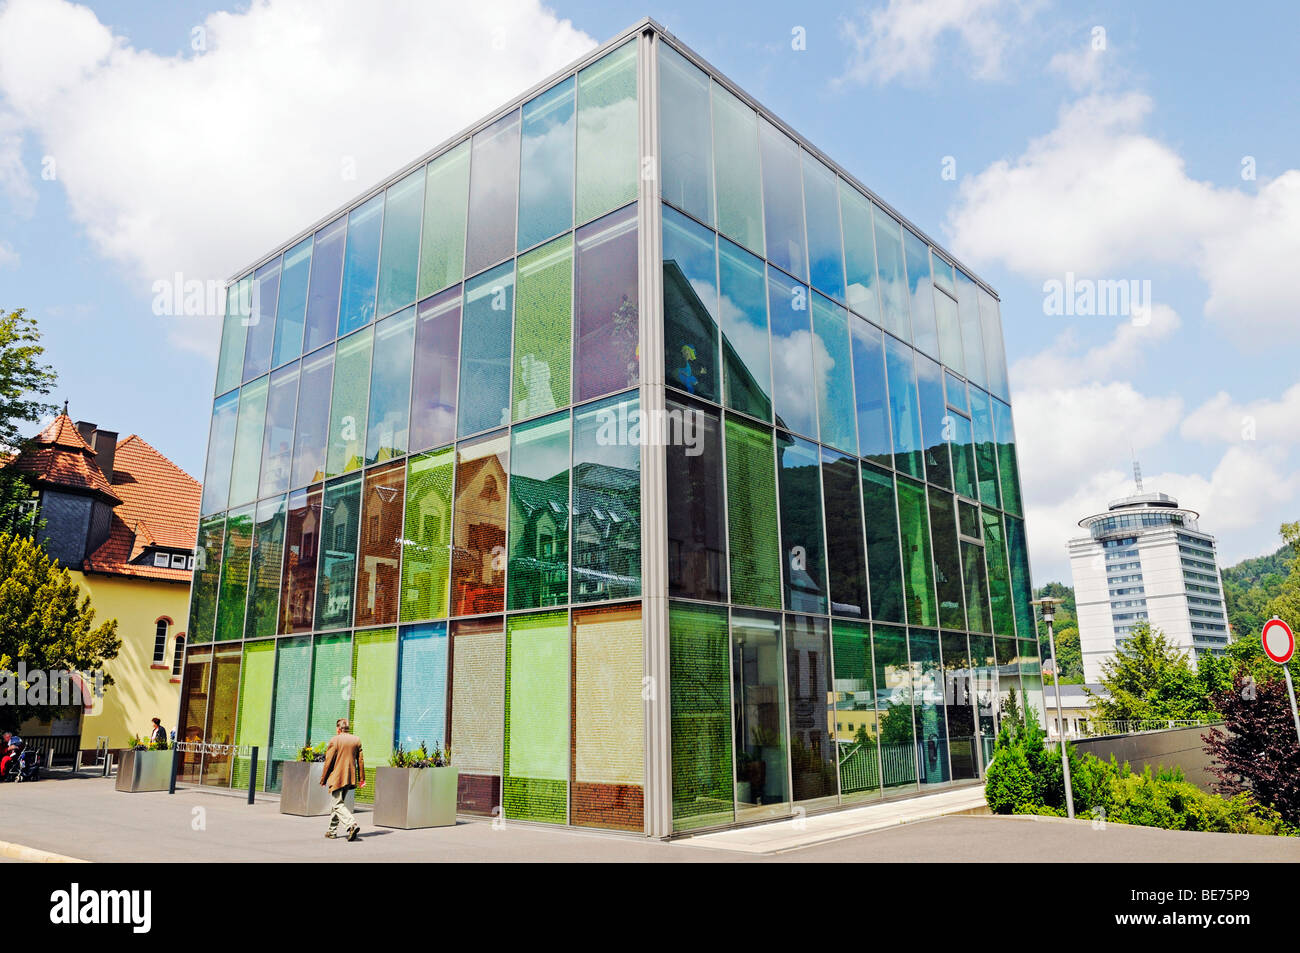 Modern public library with lettering on the glass facade, Suhl, Thuringia, Germany, Europe Stock Photo